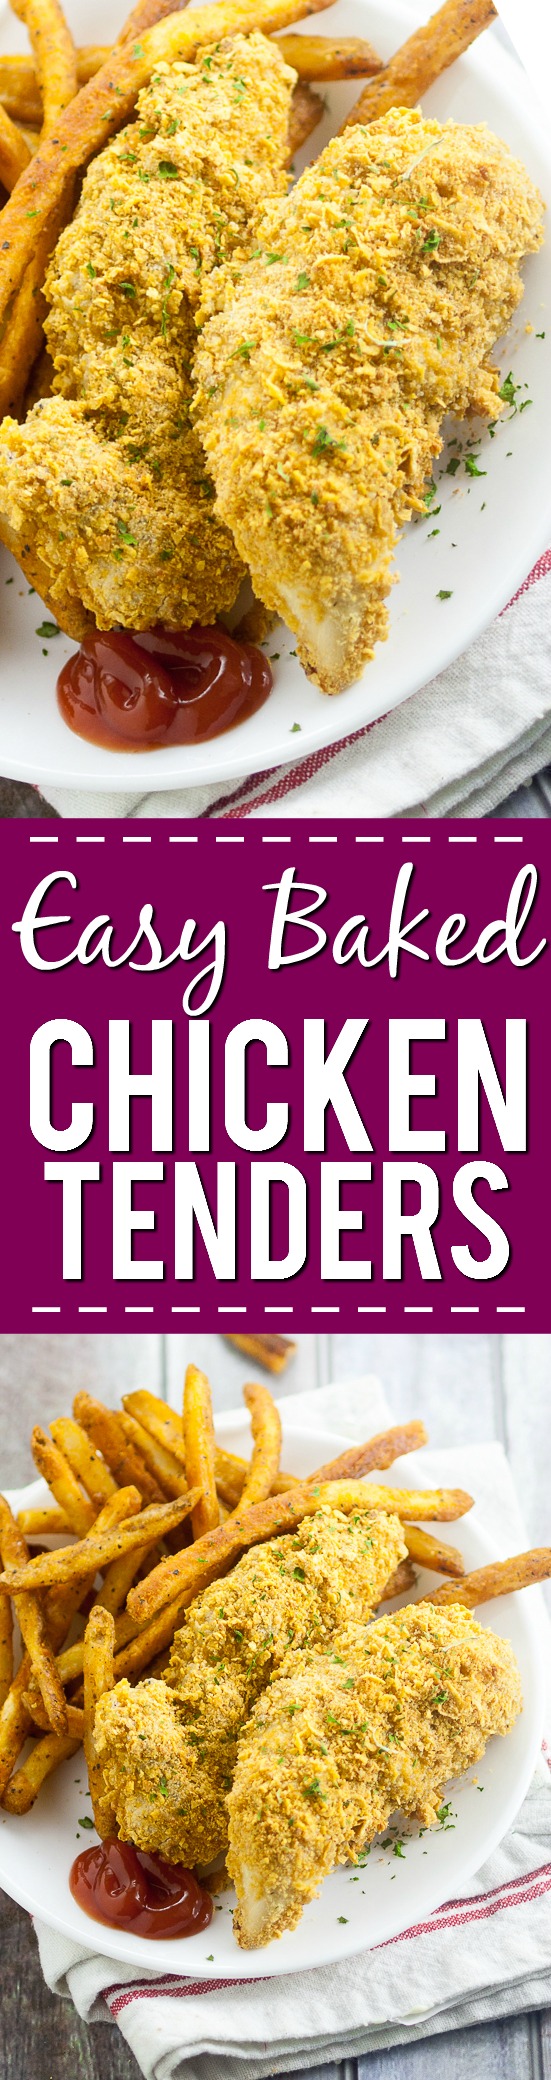 Easy Baked Chicken Tenders Recipe - Use this quick and easy recipe with basic, simple ingredients to make your own homemade Easy Baked Chicken Tenders that both you and the kids will love! Perfect easy food for kids